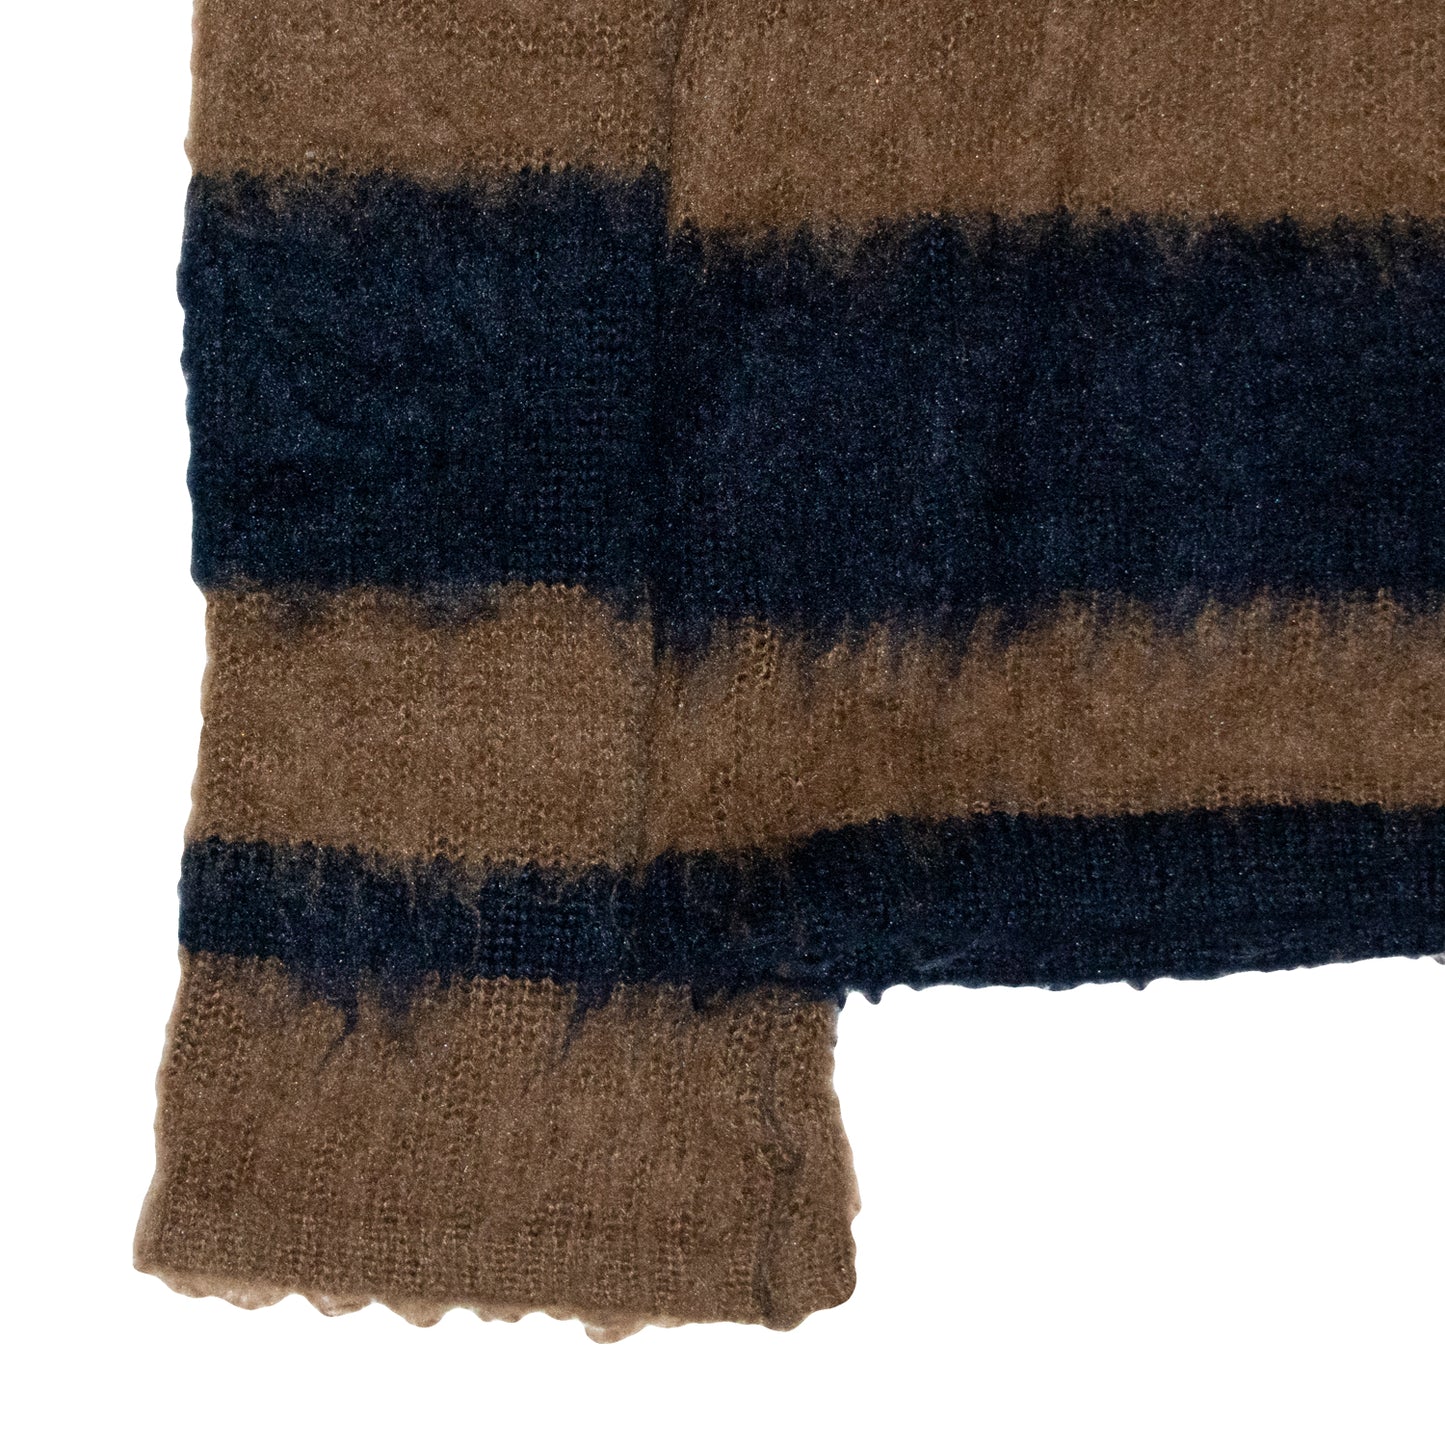 PPFM Loose Knit Striped Mohair Sweater – 2008